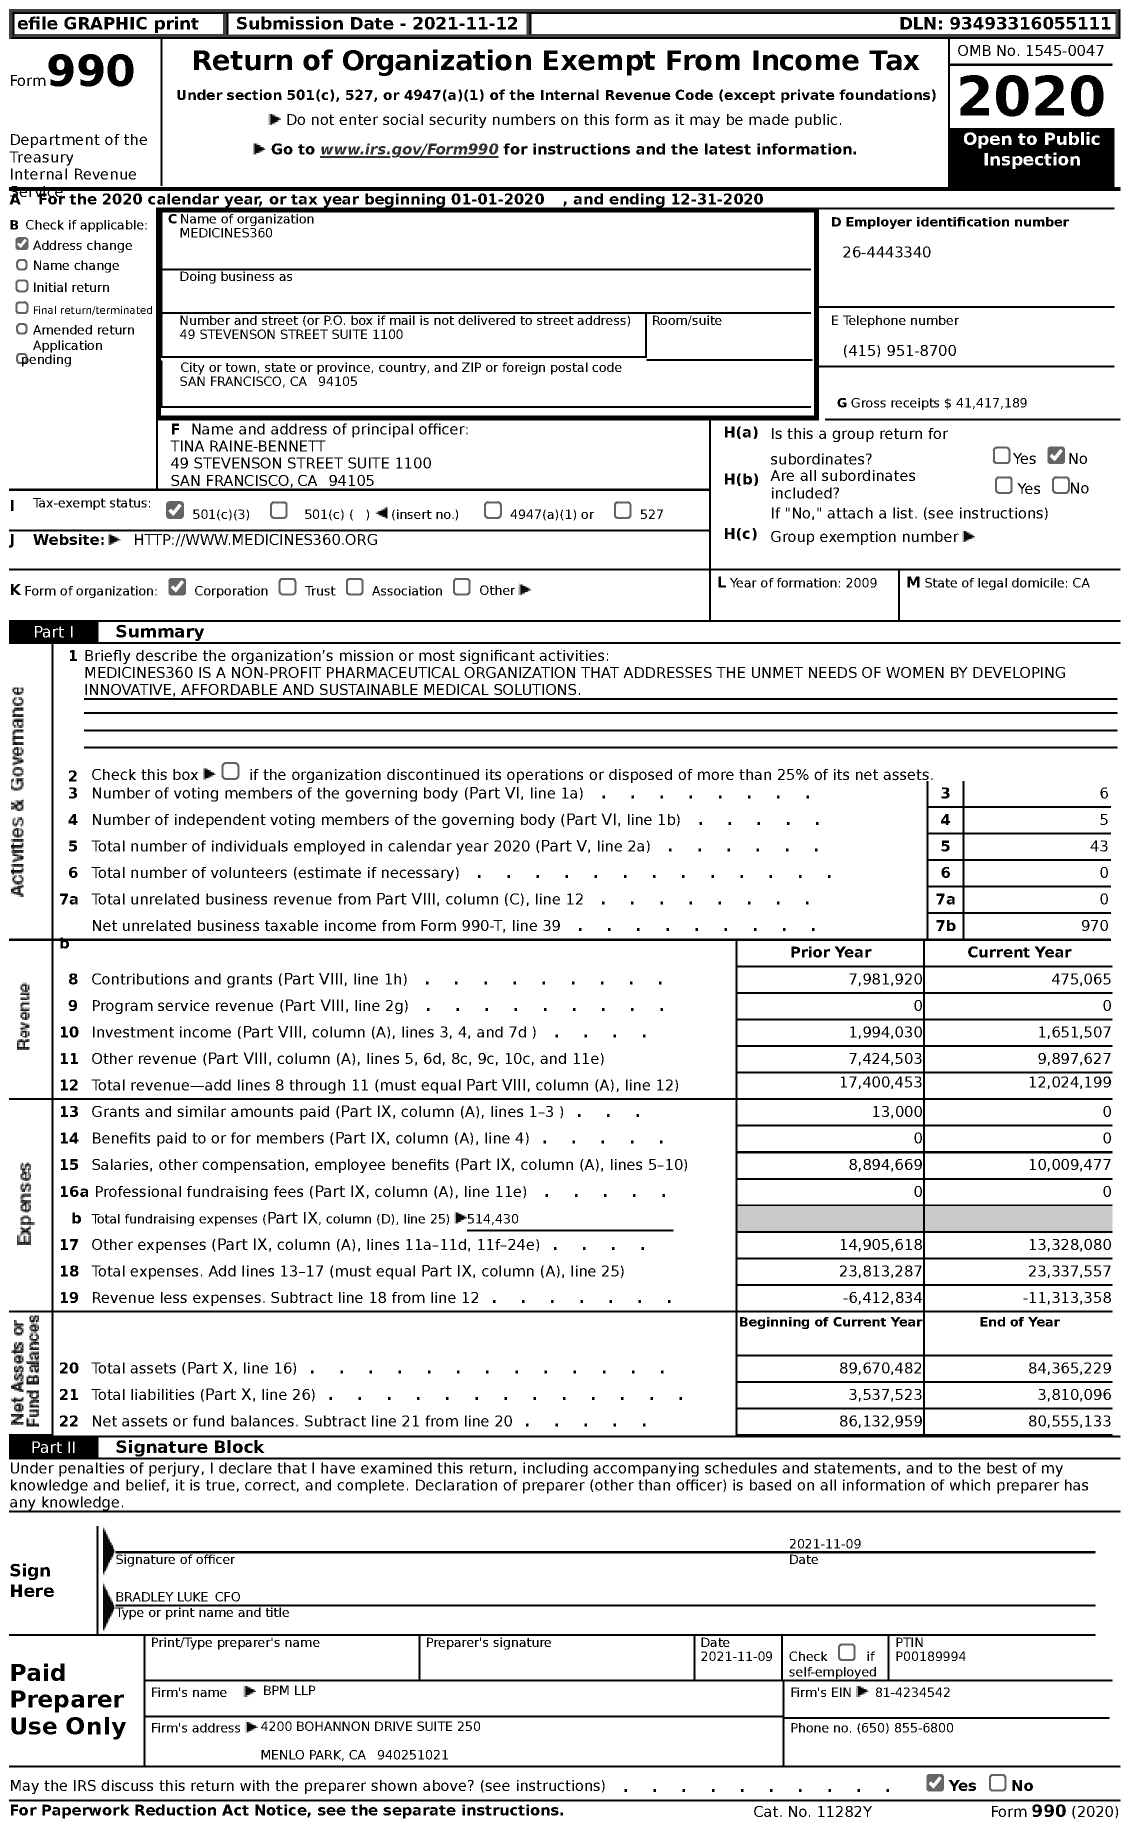 Image of first page of 2020 Form 990 for Medicines360